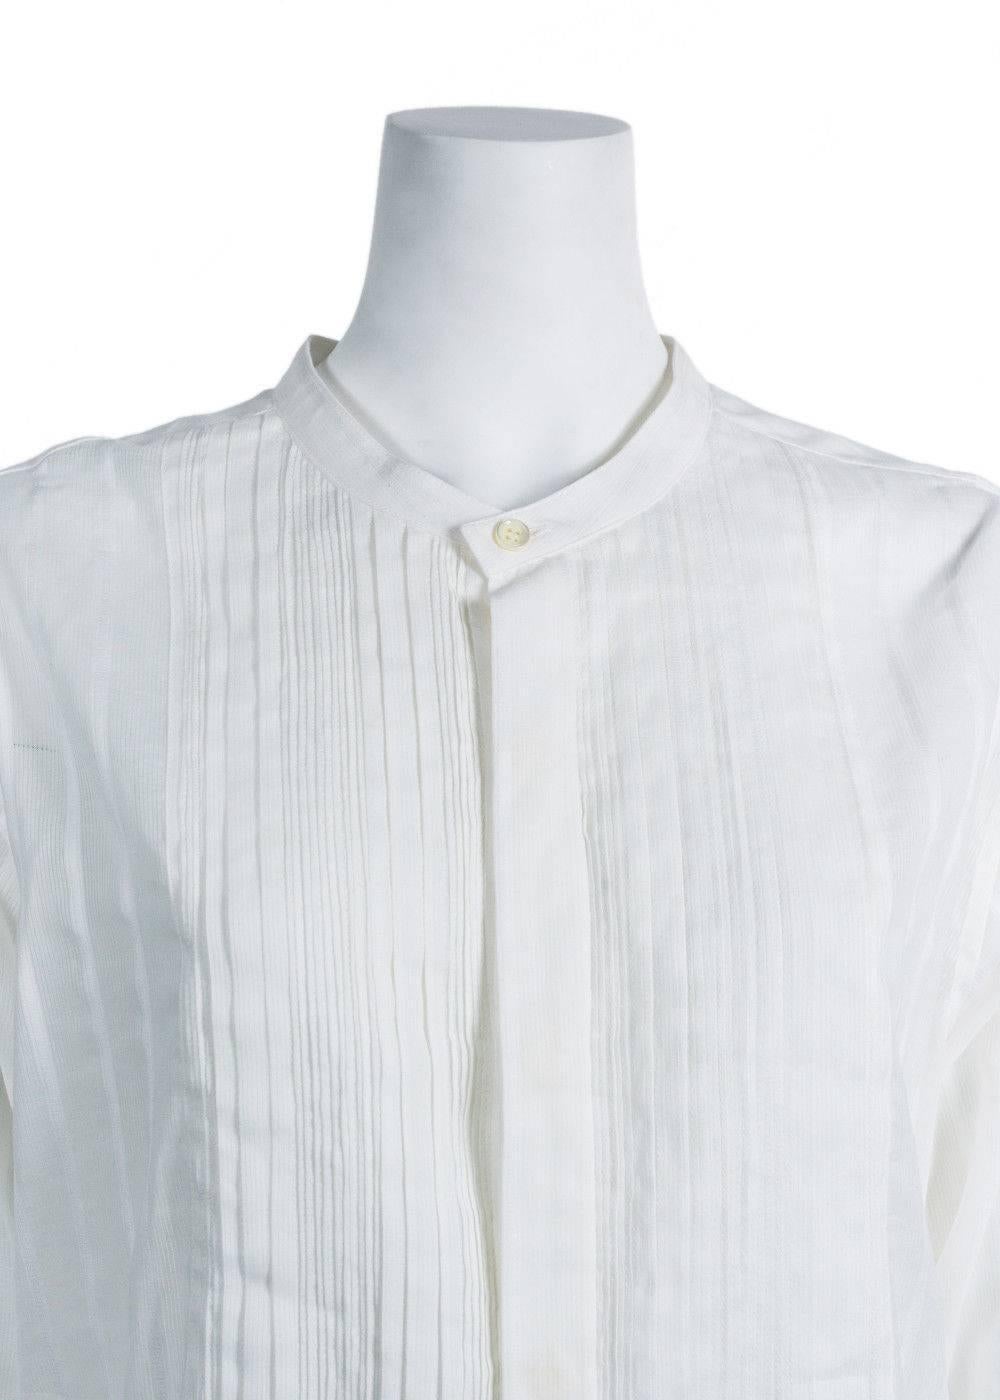 Brand New Saint Laurent Tunic
Original Tags & Hanger Included
Retails in Stores & Online for $1350
Size IT38 / US2 Fits True to Size

Saint Laurent's long-sleeve tunic blouse is constructed of white plain-weave cotton embroidered with tonal textured